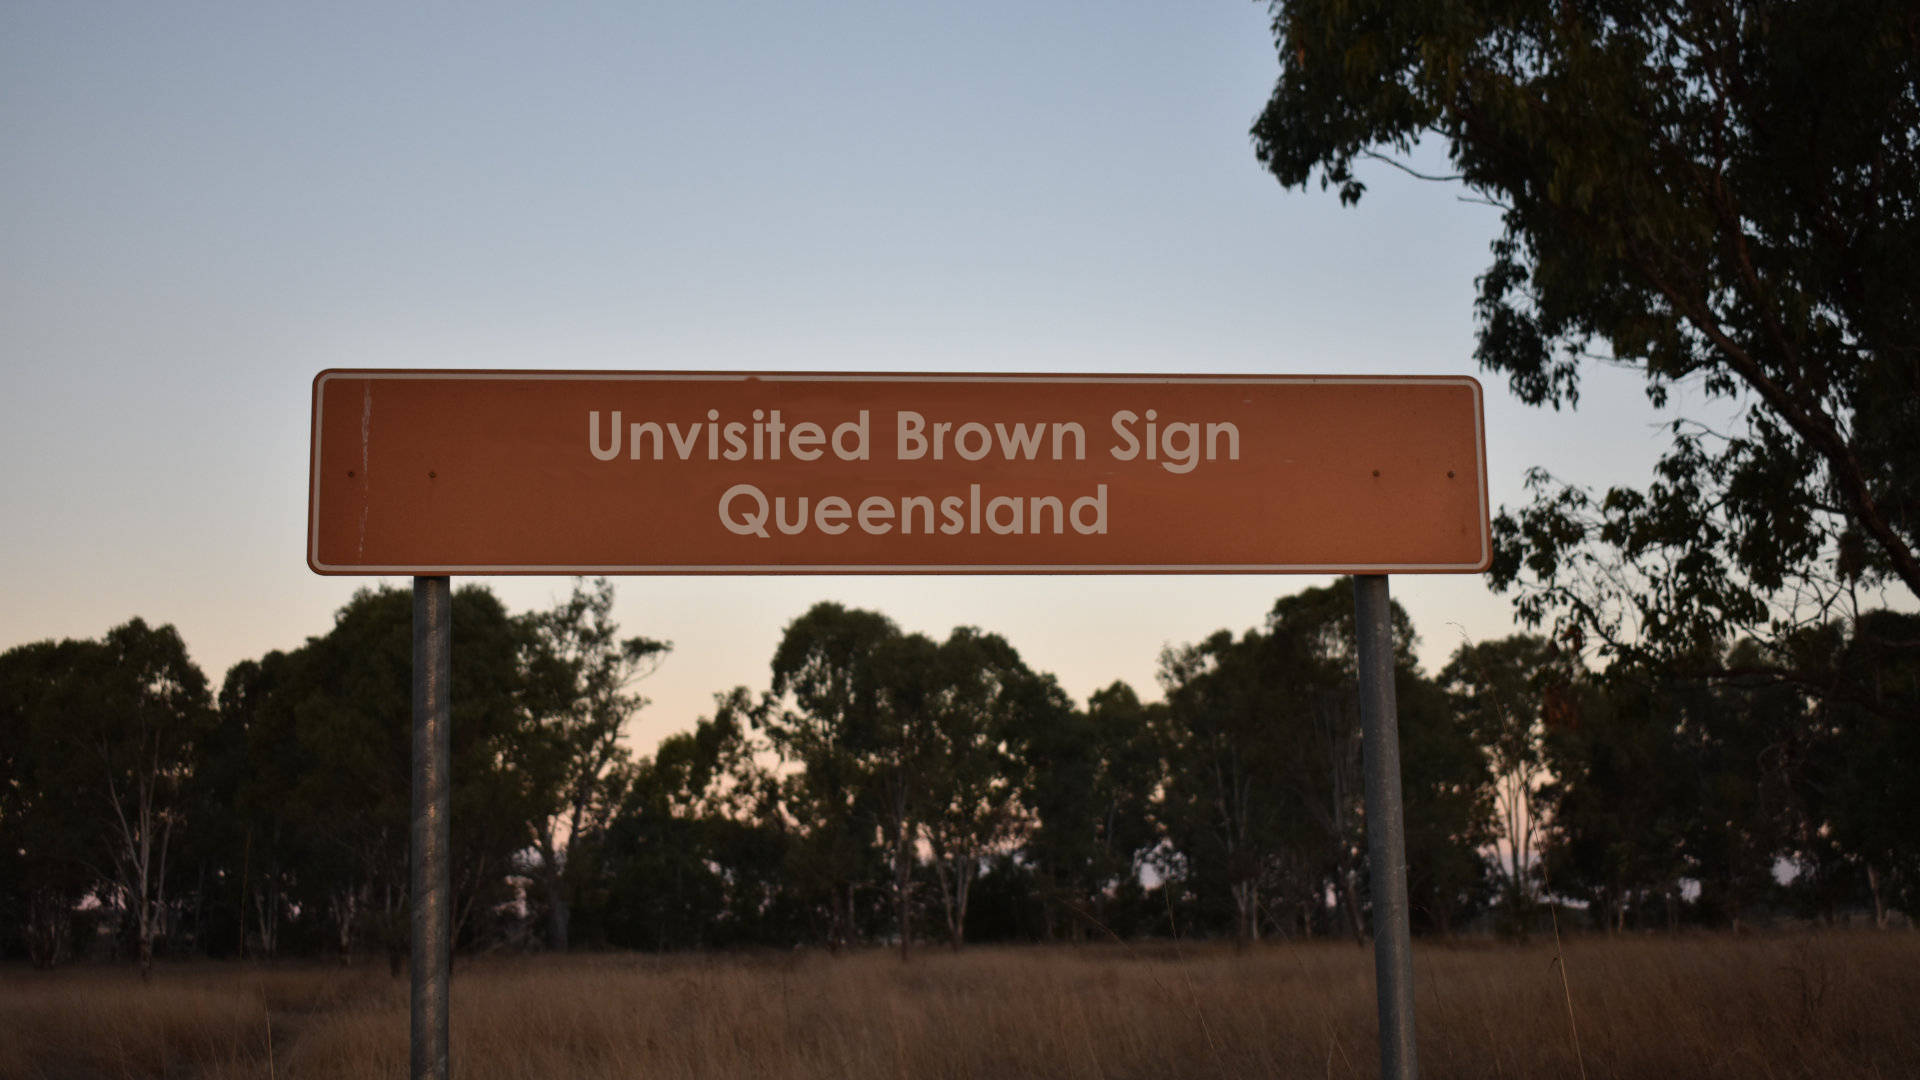 Unvisited Brown Sign Queensland